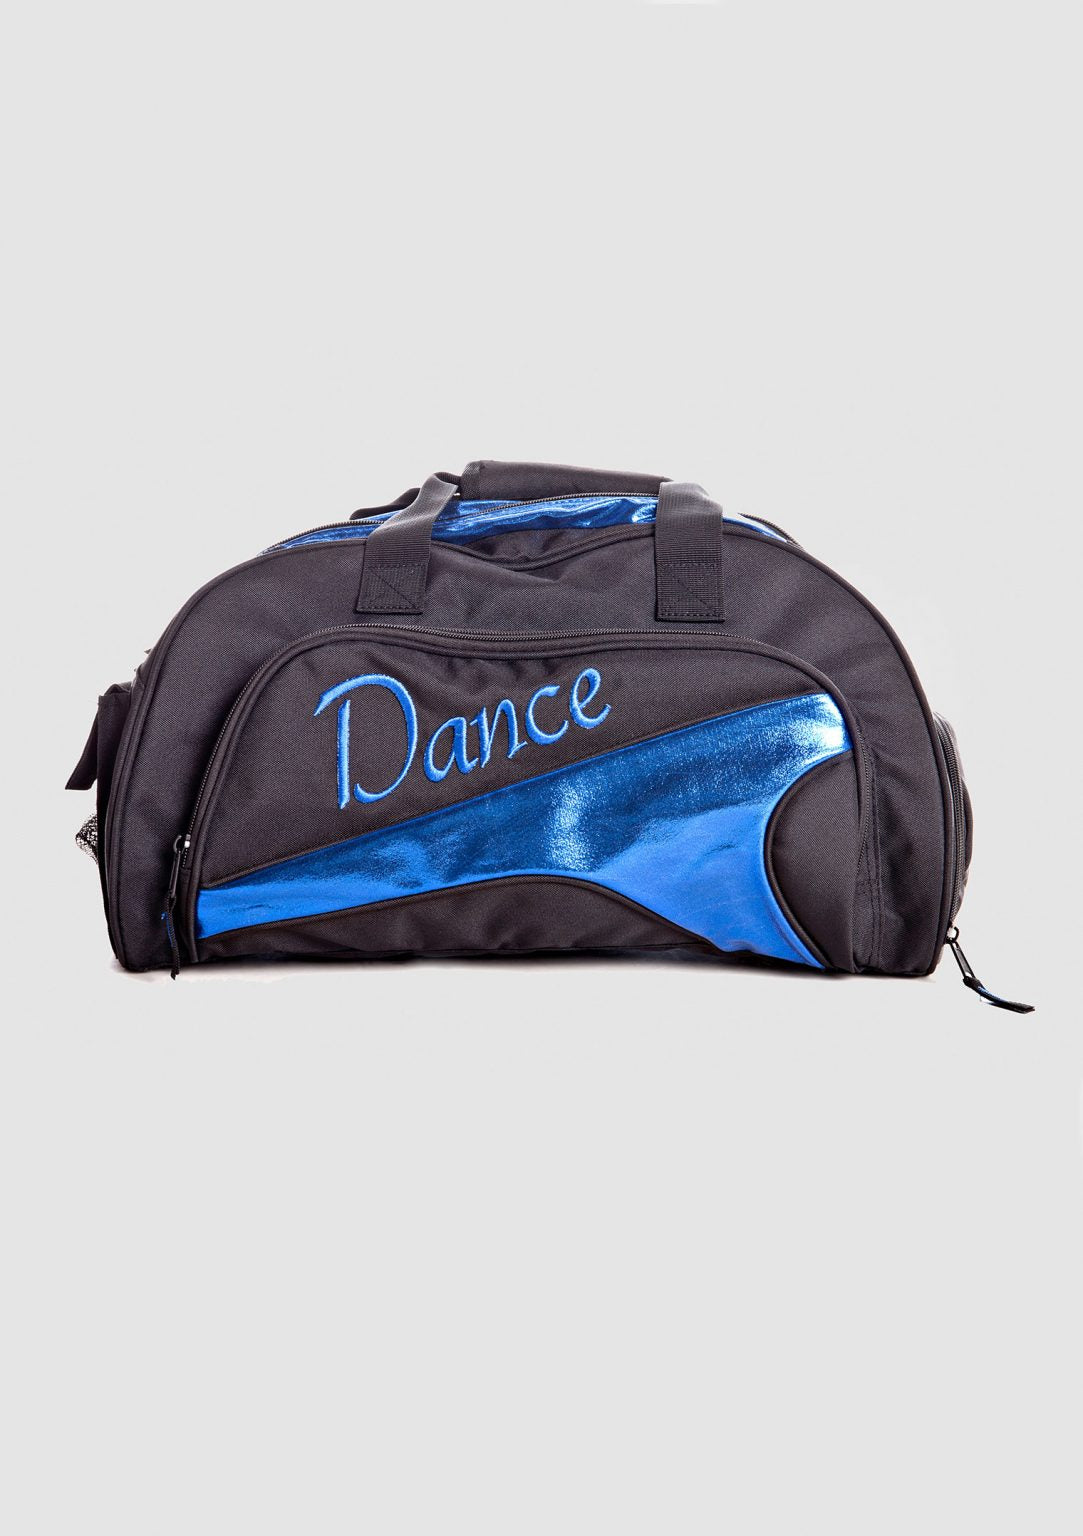 Studio 7 - Junior Duffel Bags - ECO Friendly - 5 Colours to Choose From!